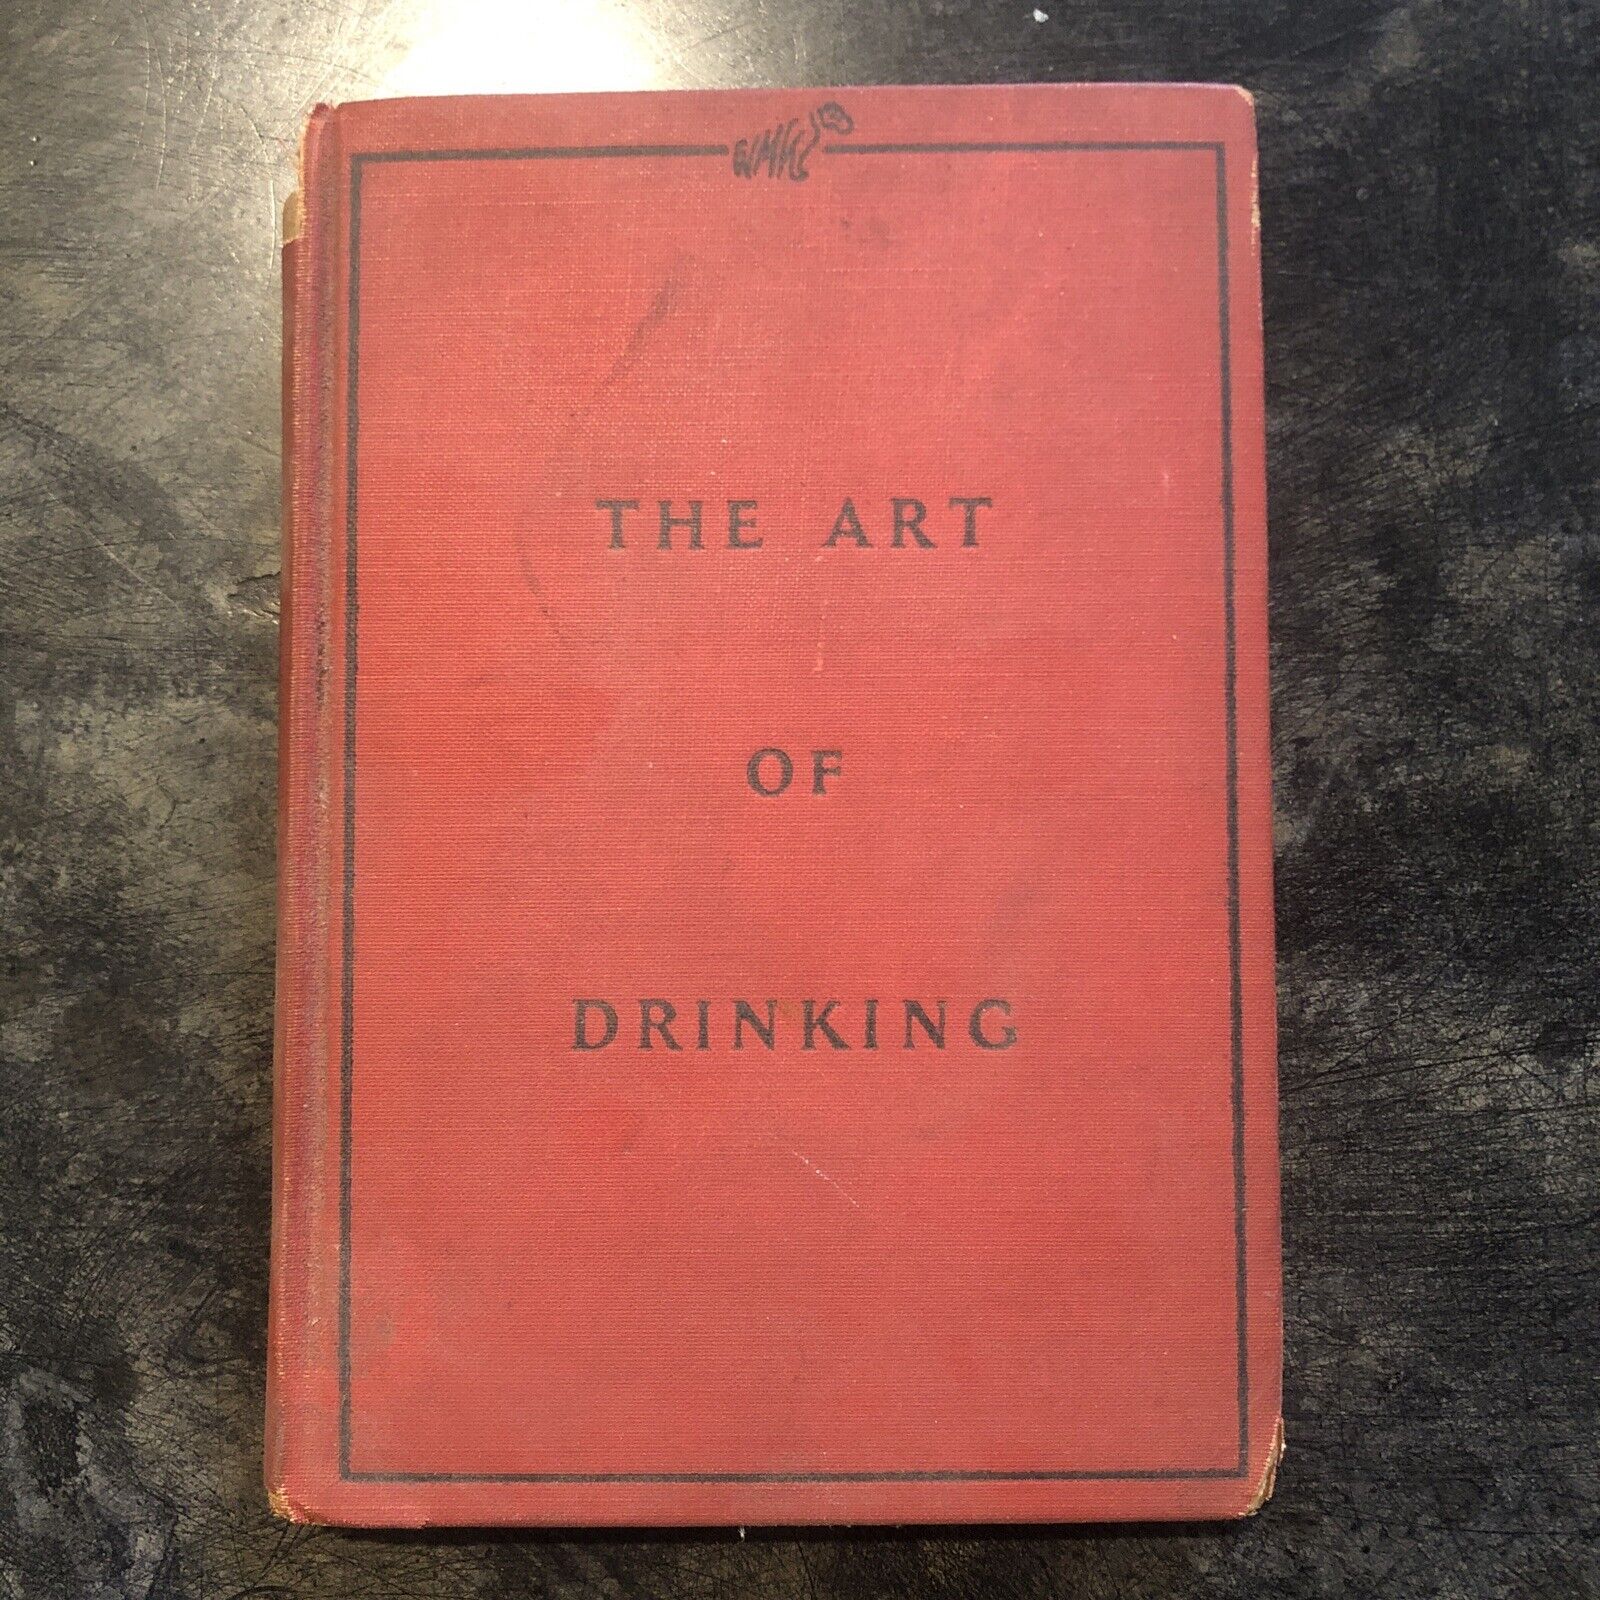 1939 - The Art of Drinking or What to Make with What You Have - Dexter Mason